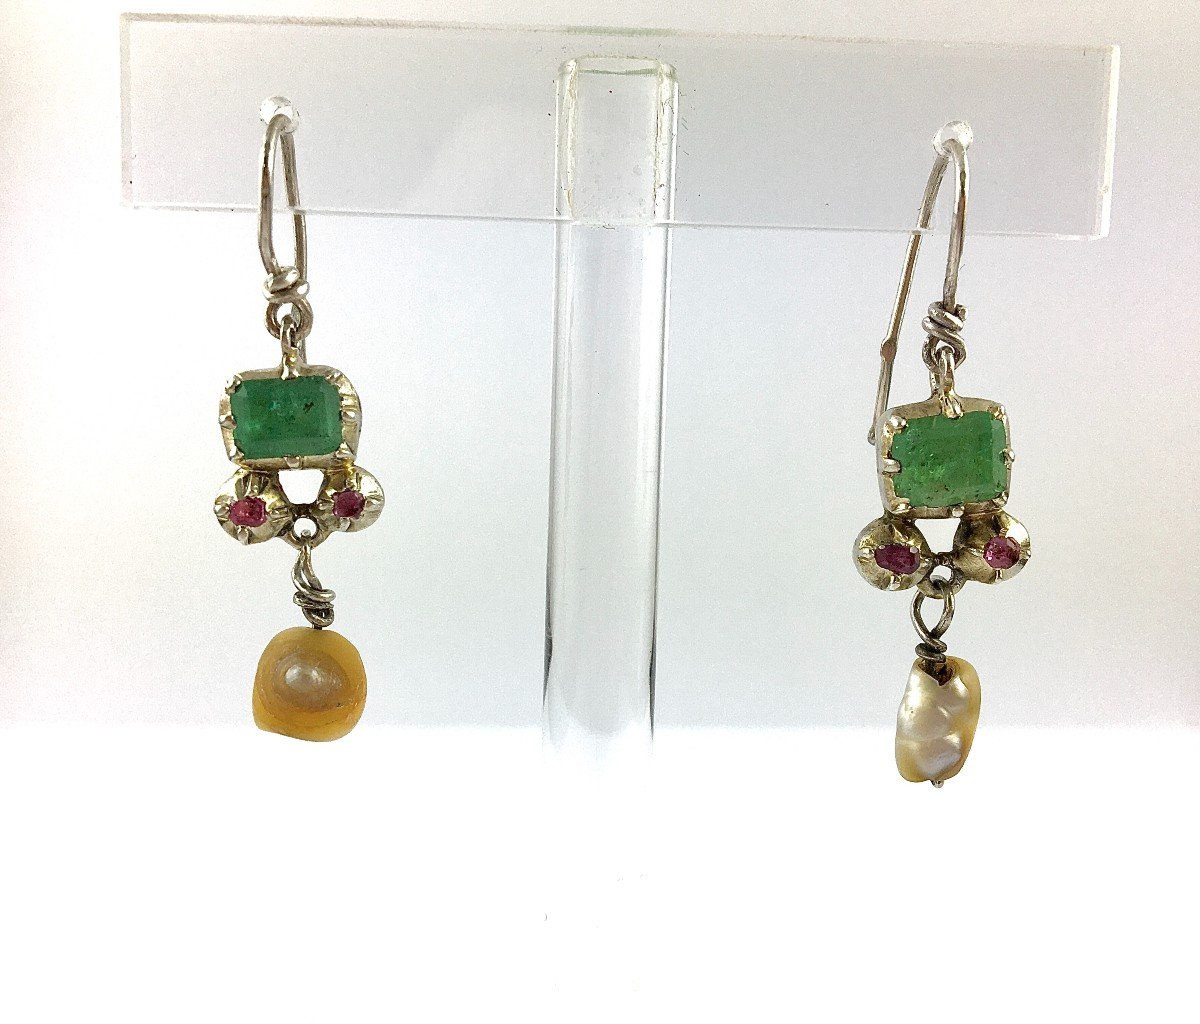 Berber Ethnic Earrings Dangling Emeralds, Rubies And Baroque Pearls On Silver-photo-2